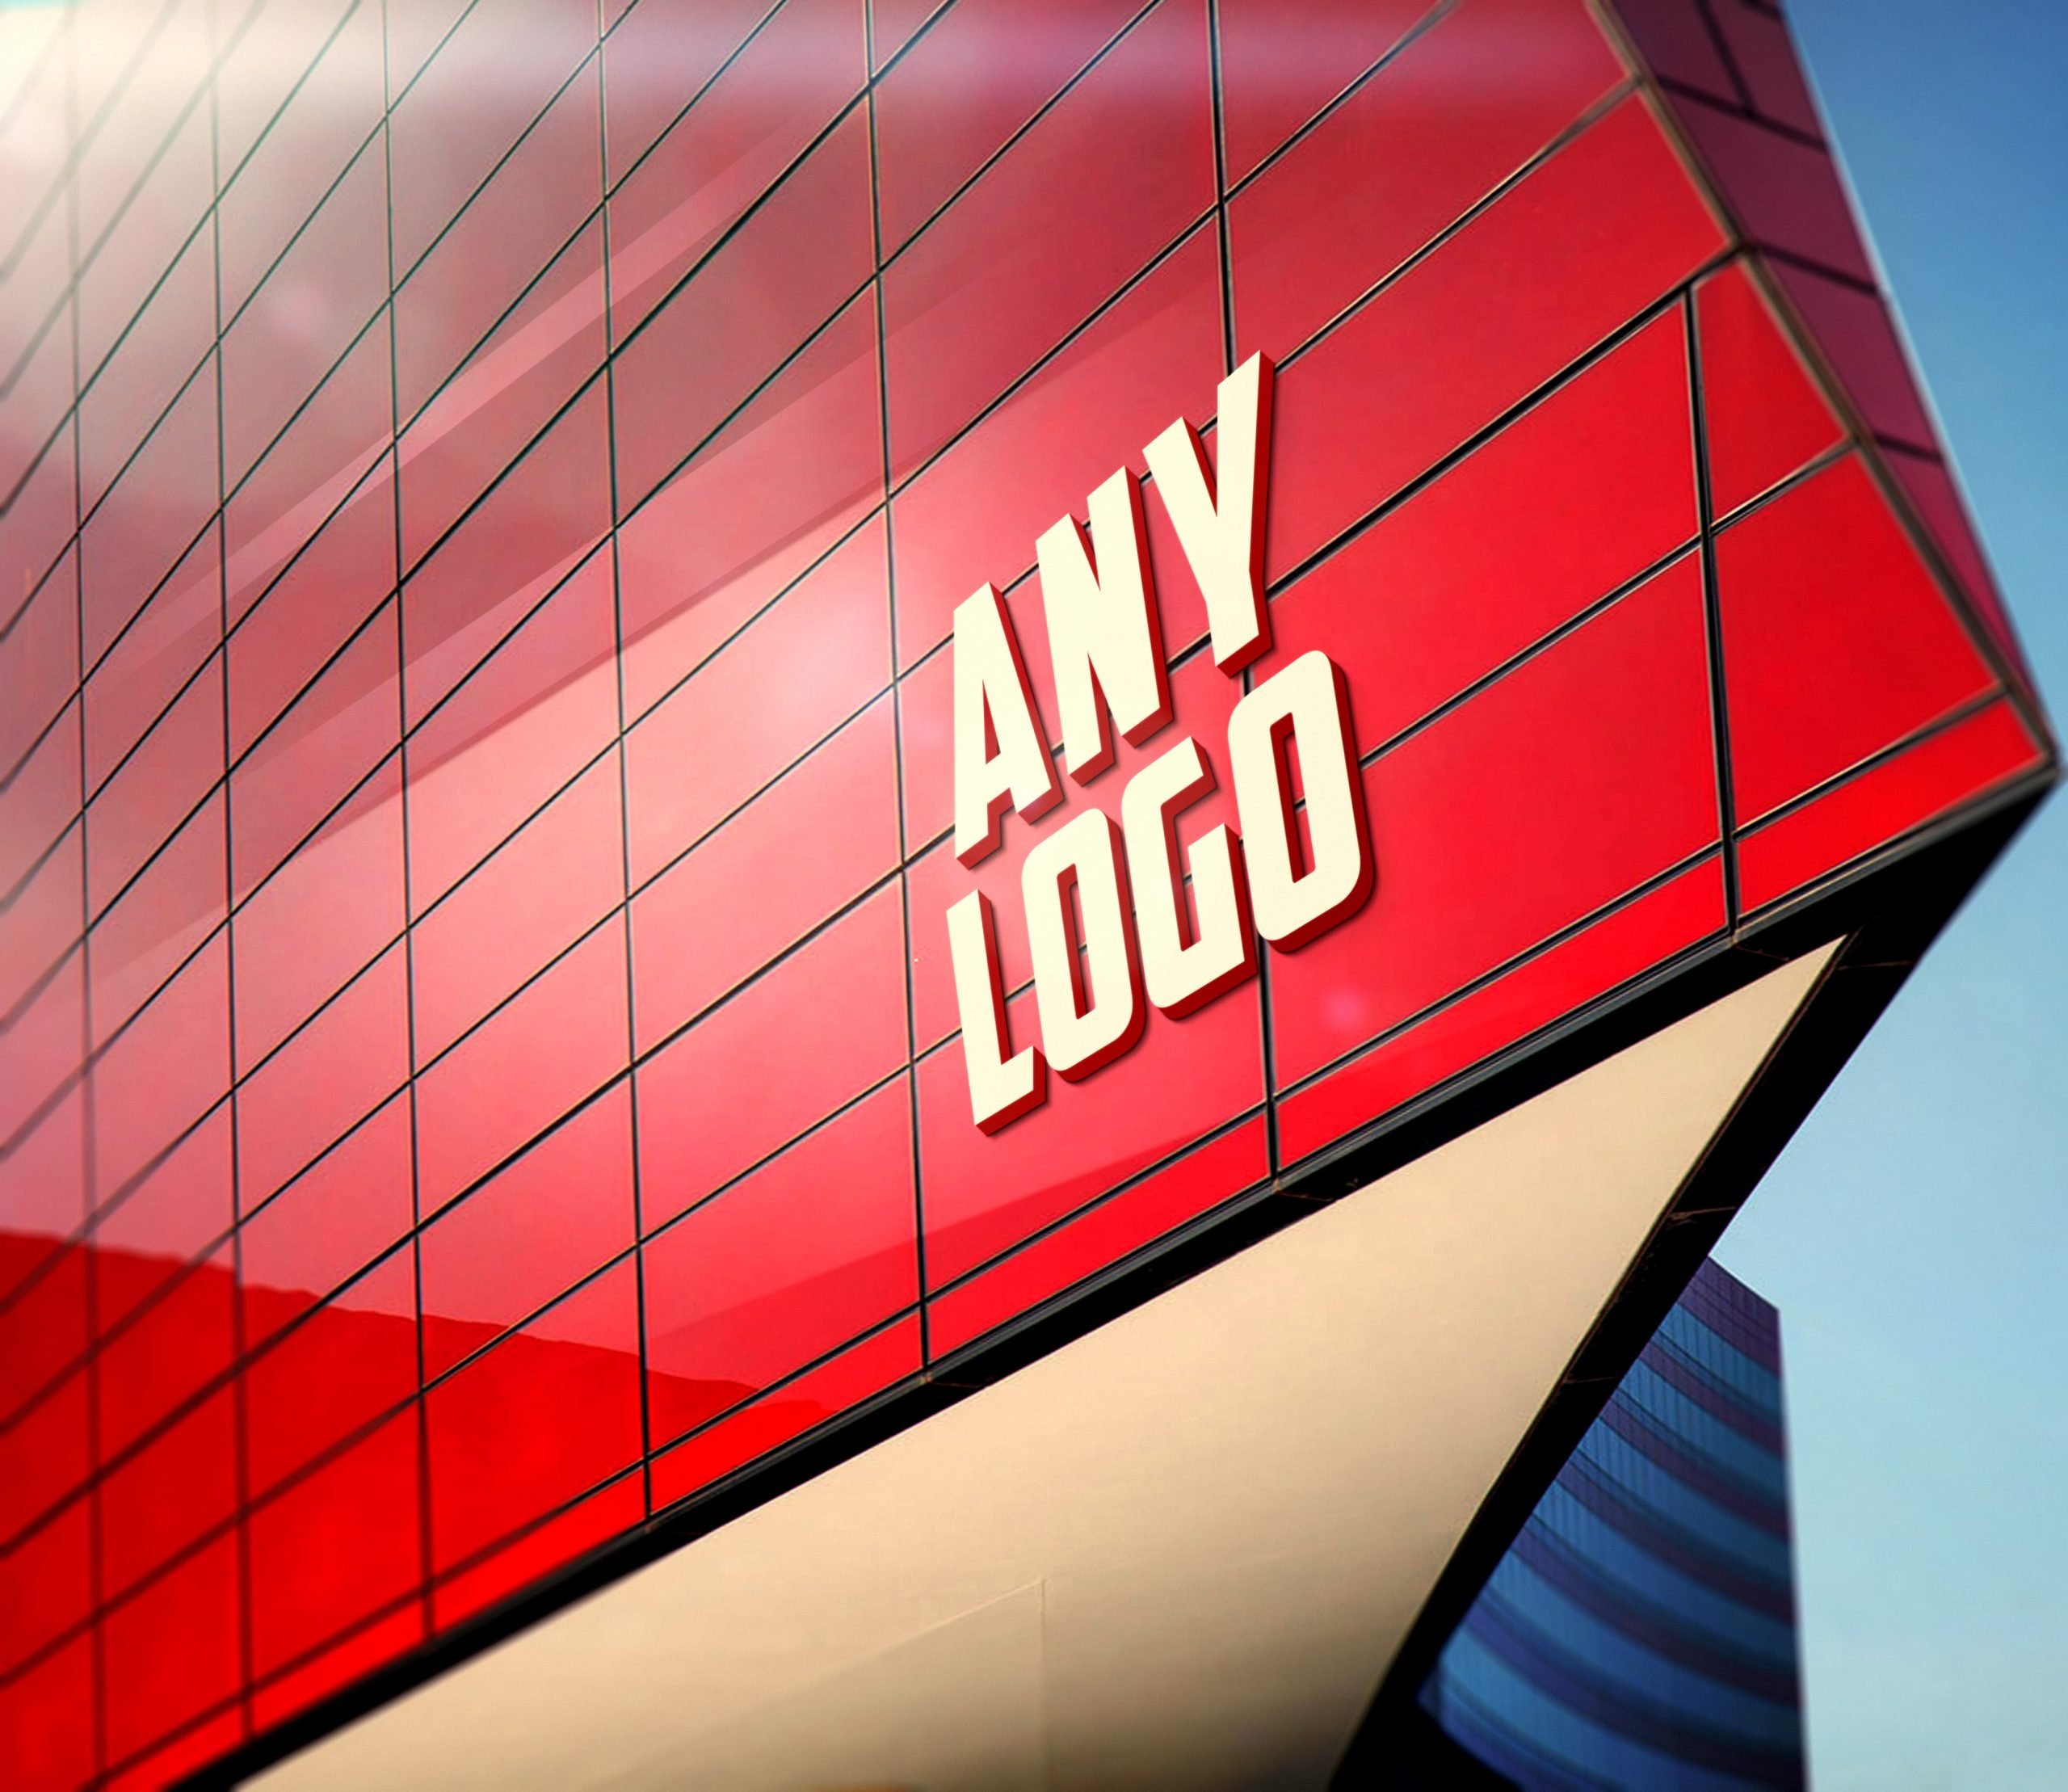 Any Logo Free 3D Red Building Facade Logo Mockup scaled - Awesome Free .PSD Logo Mockups to Download